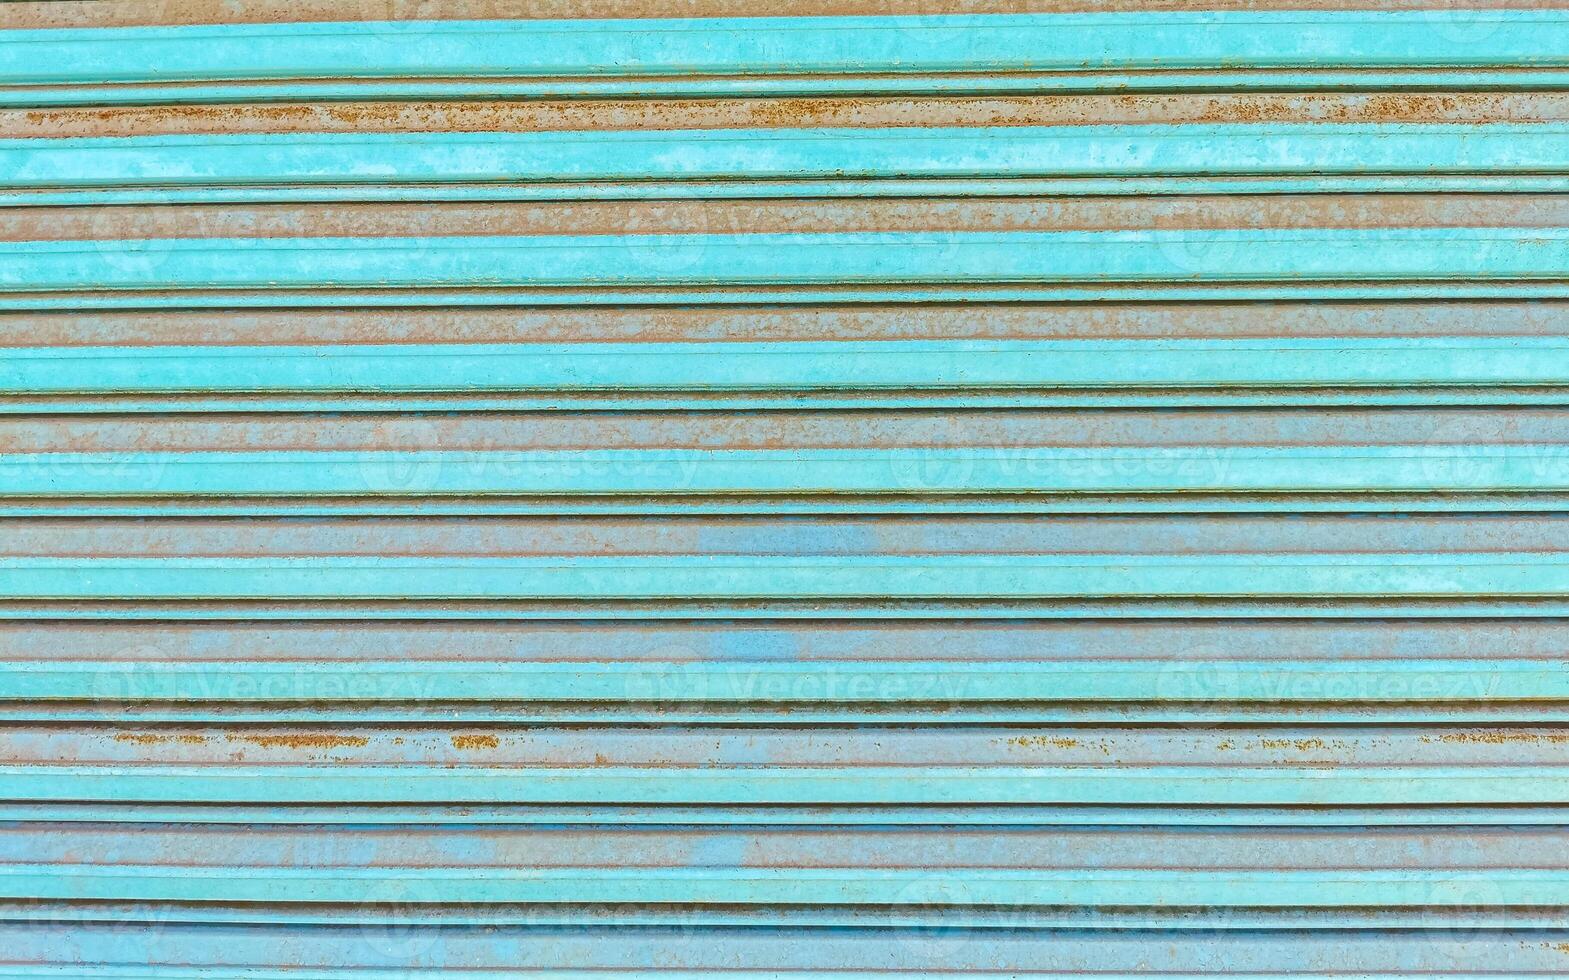 Metal gate door fence texture pattern in Mexico. photo